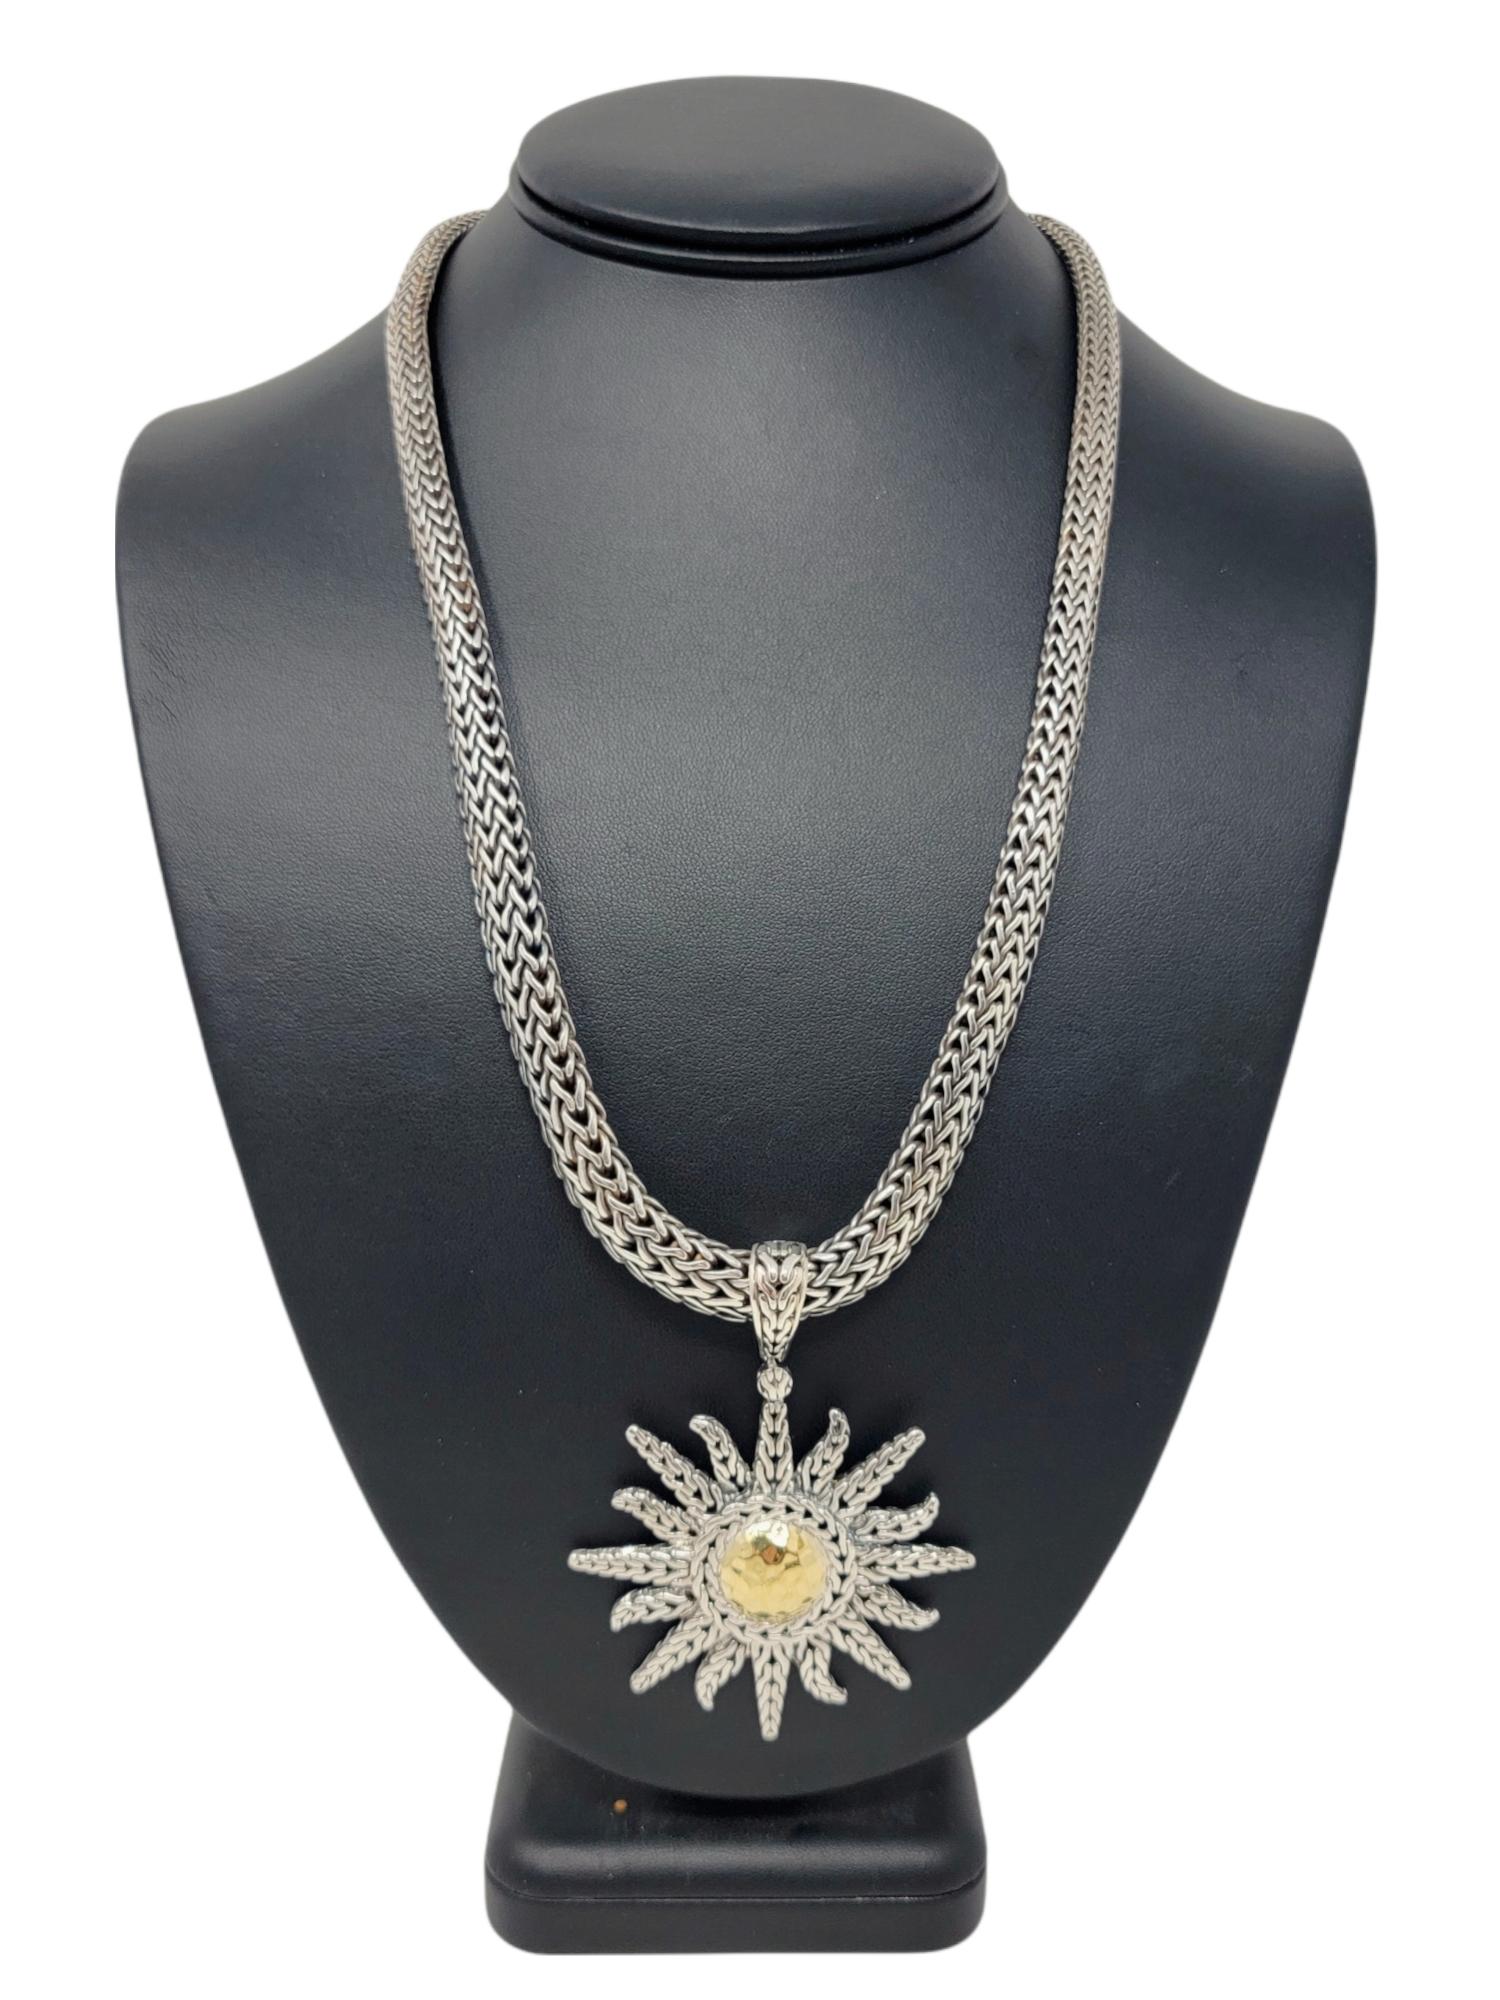 John Hardy Two-Tone Hammered Sun Pendant Necklace in Sterling and 22 Karat Gold 10